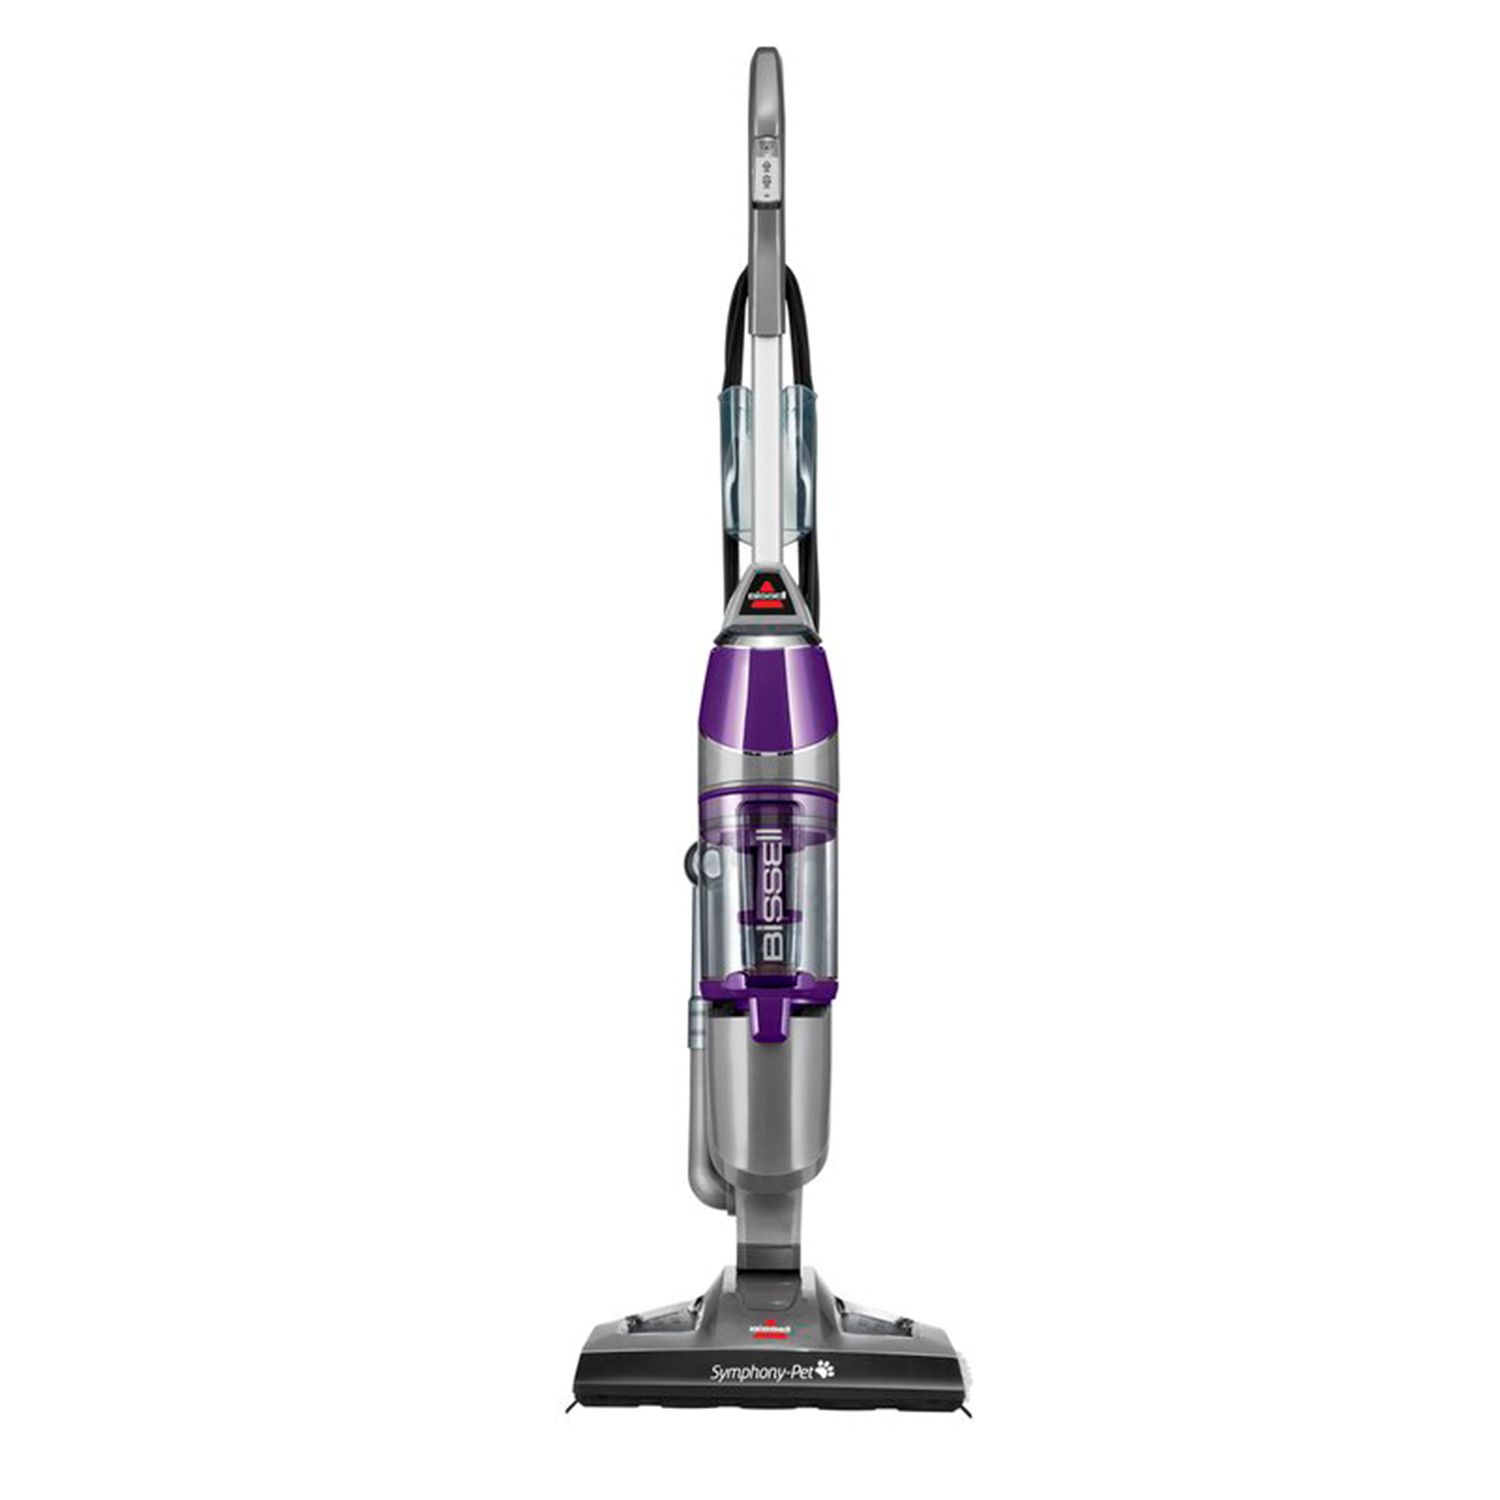 Bissell Symphony Pet All-in-One Vacuum